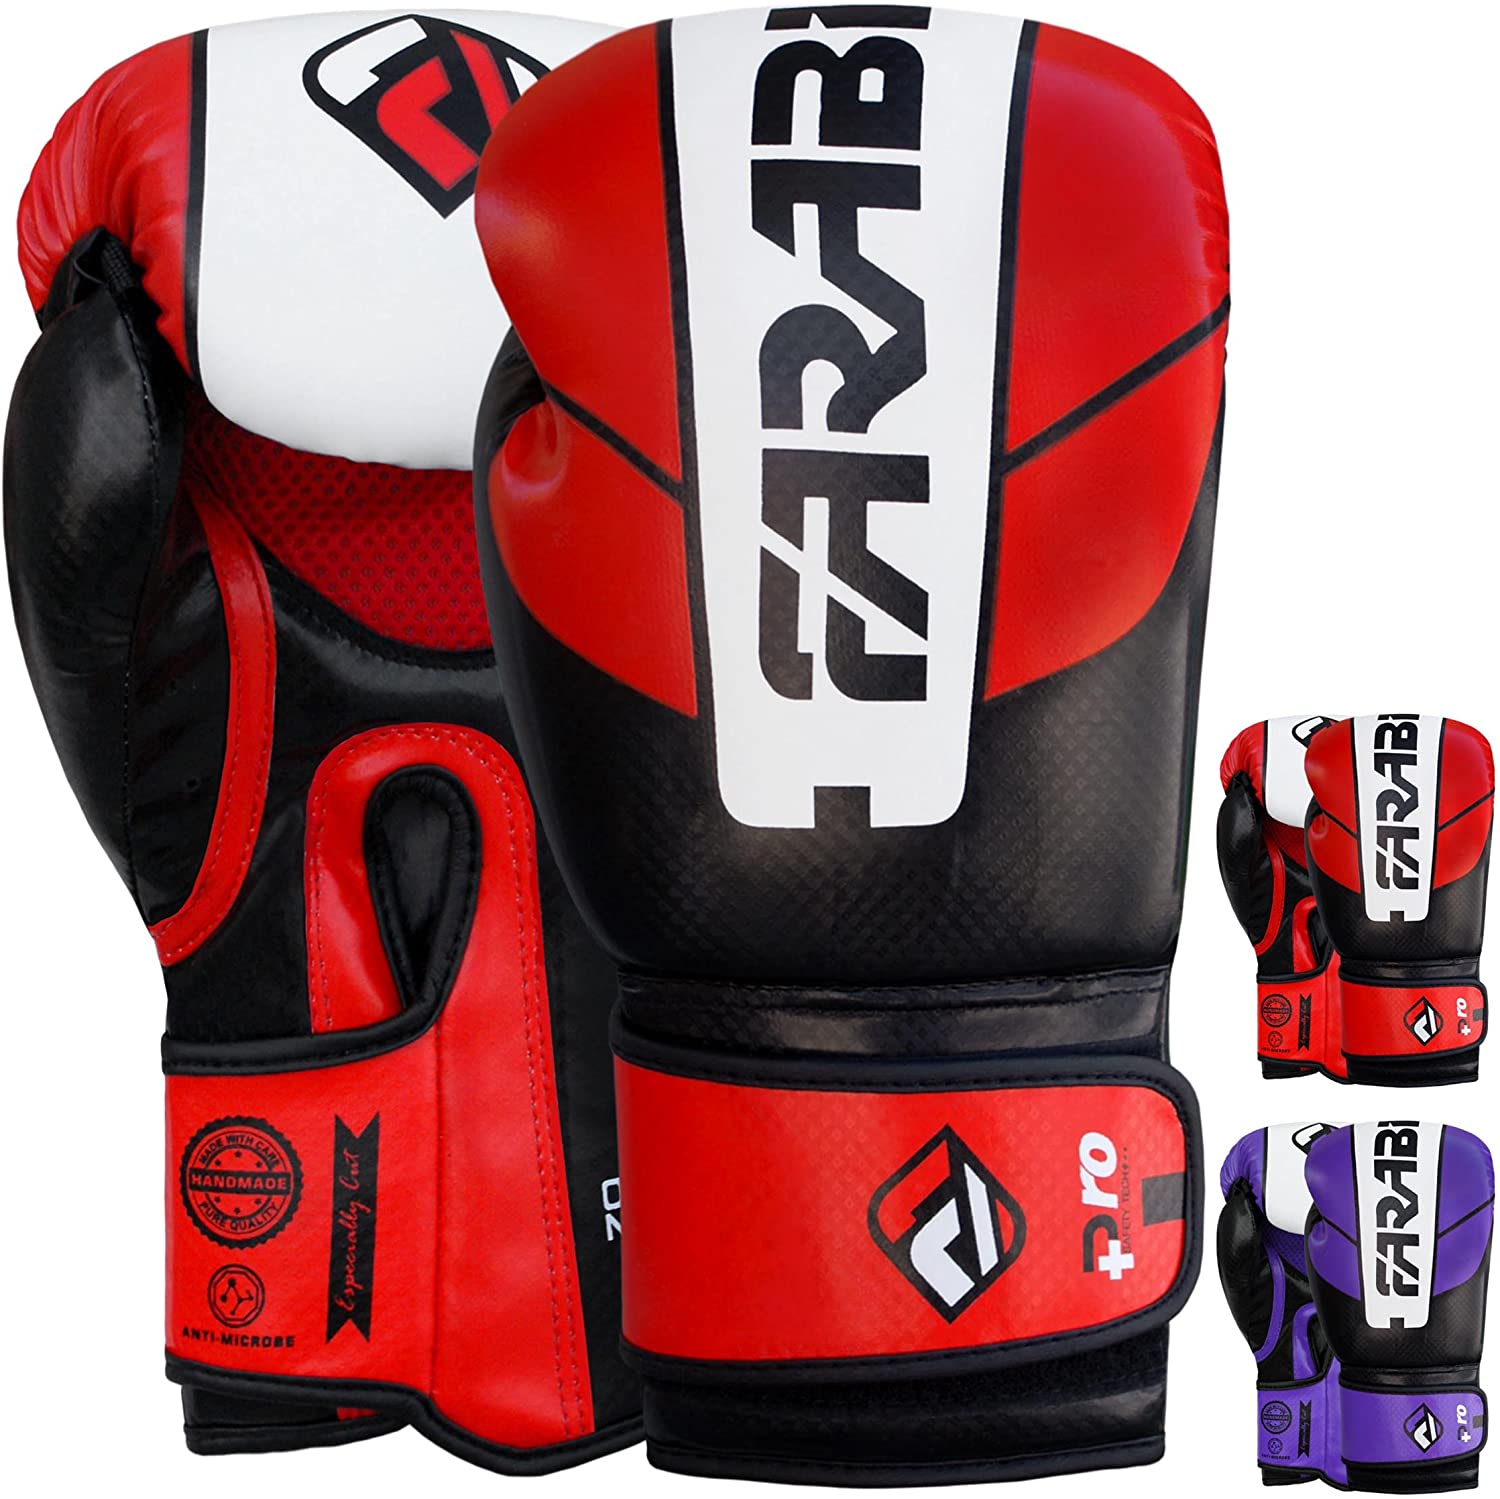 RDX MMA Gloves for Martial Arts Training and Grappling, Approved